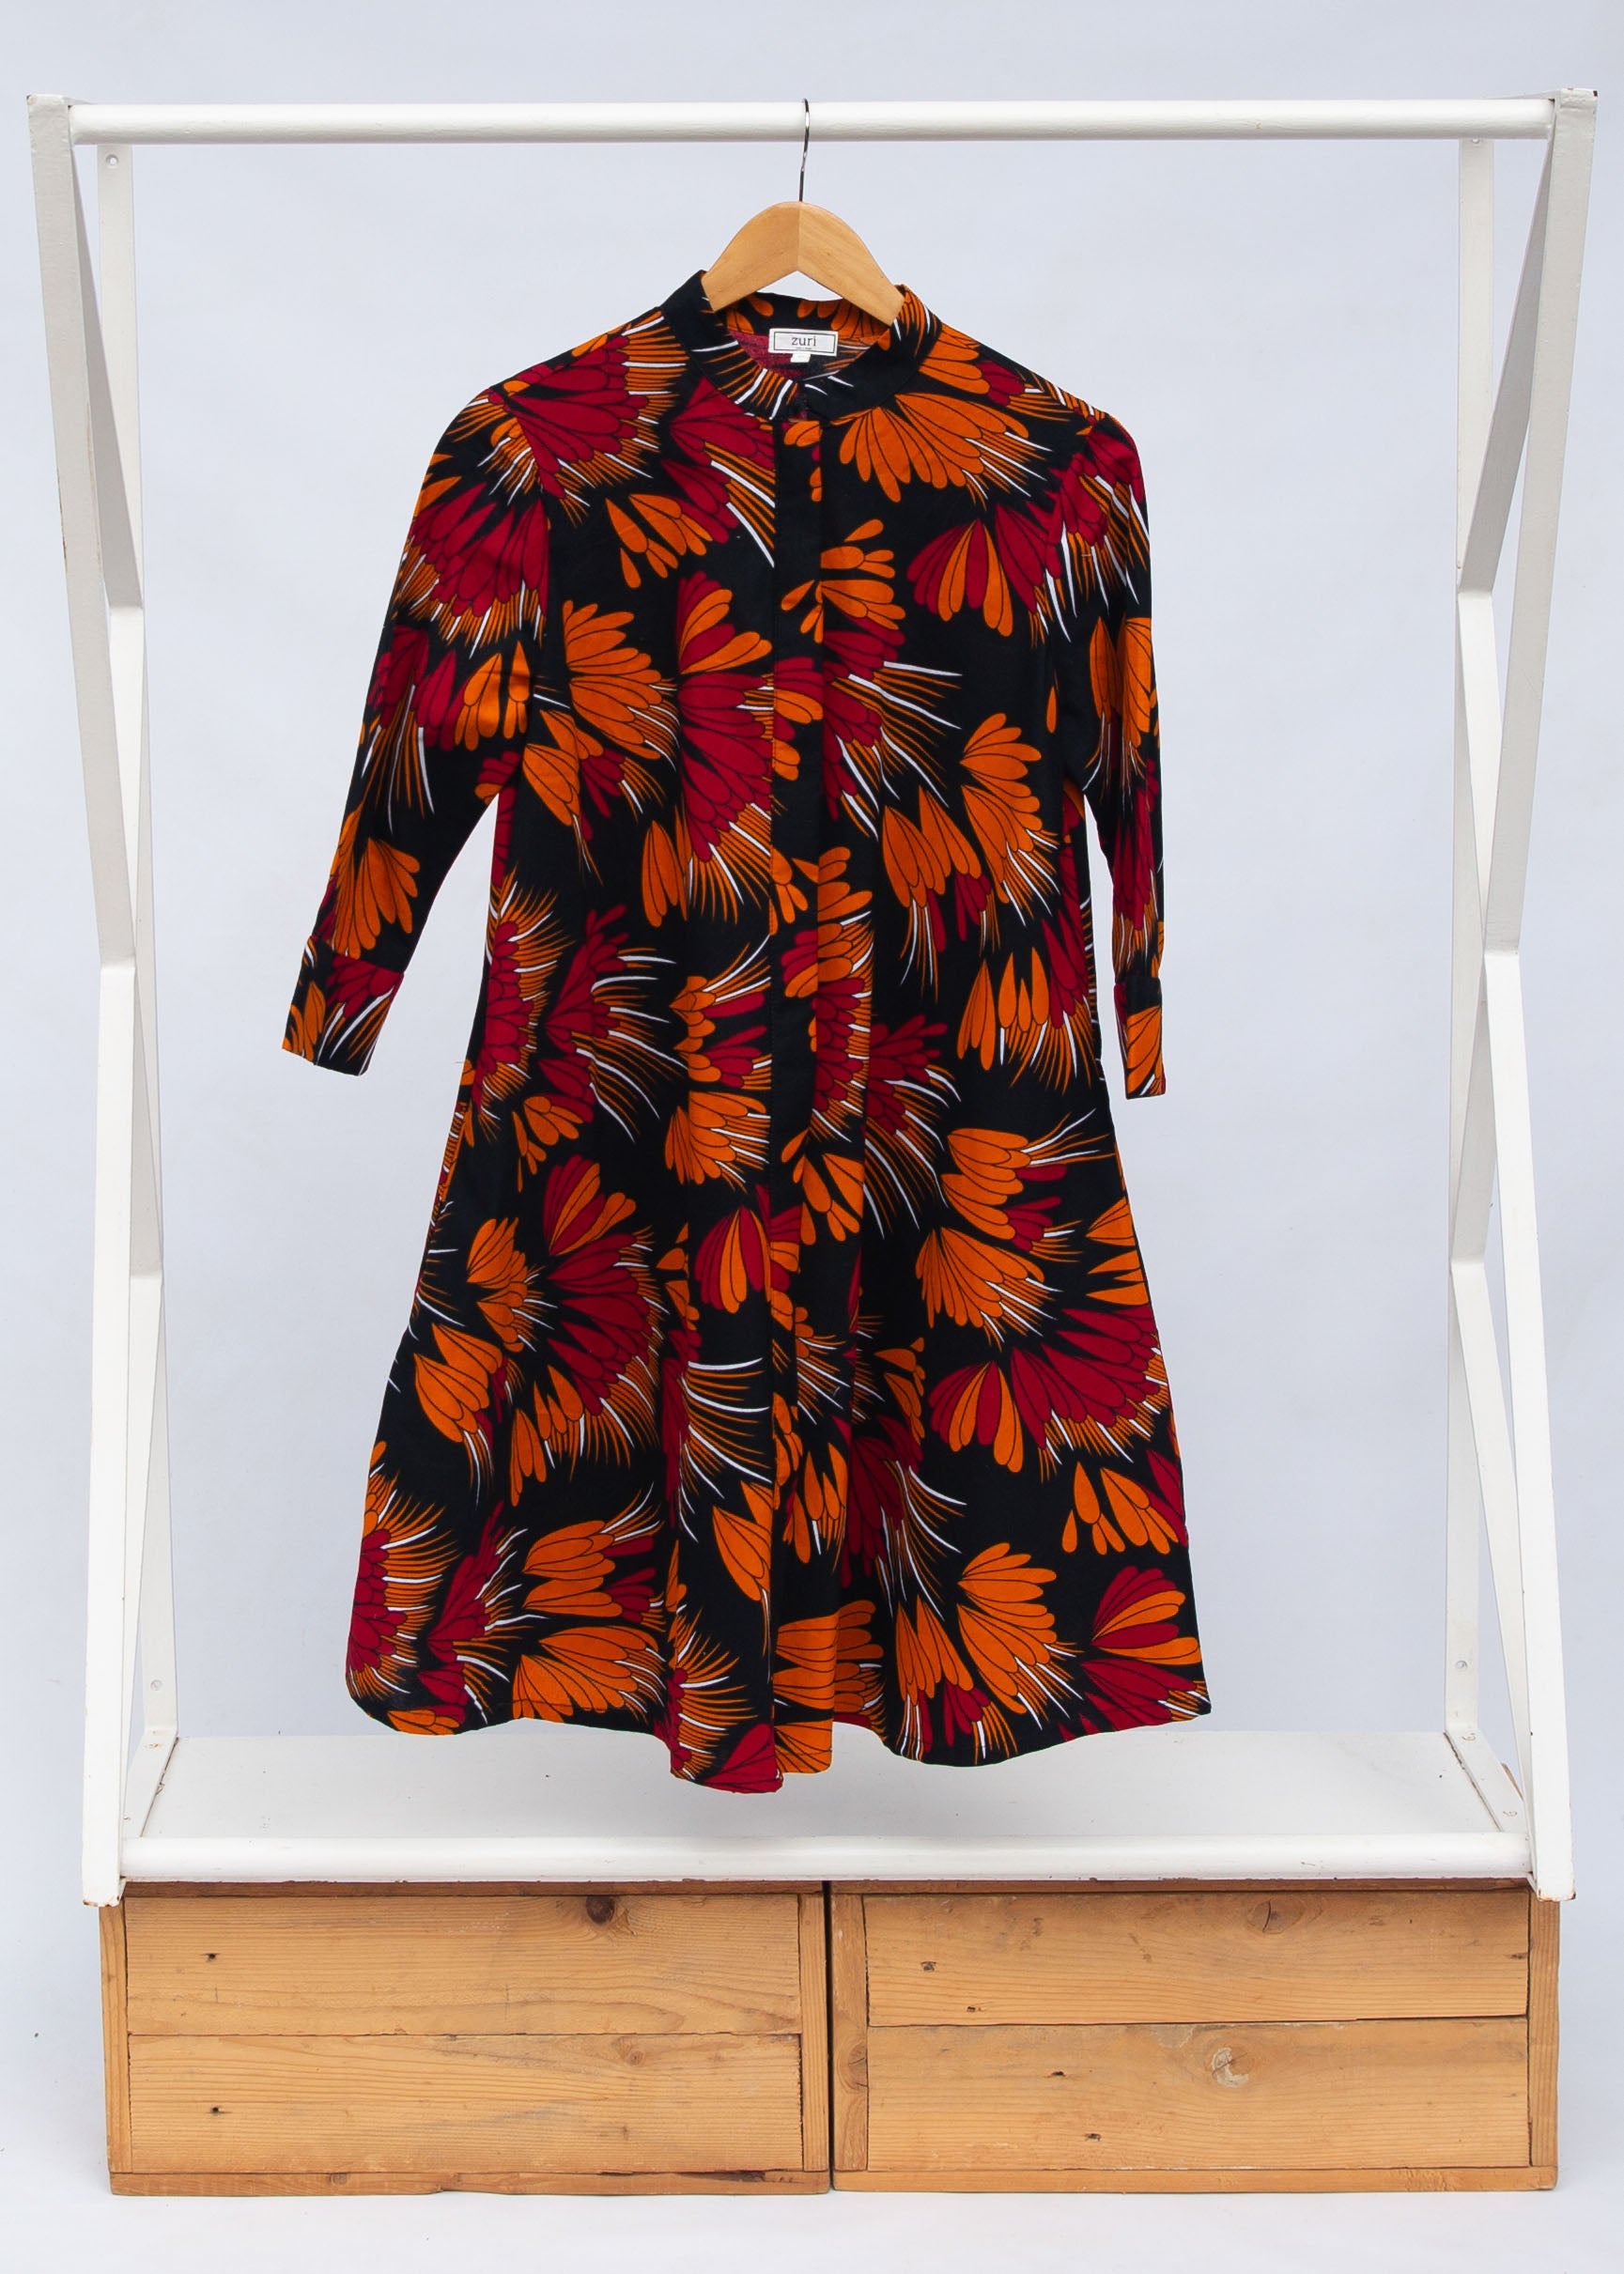 Display of black dress with orange, red and white floral print.